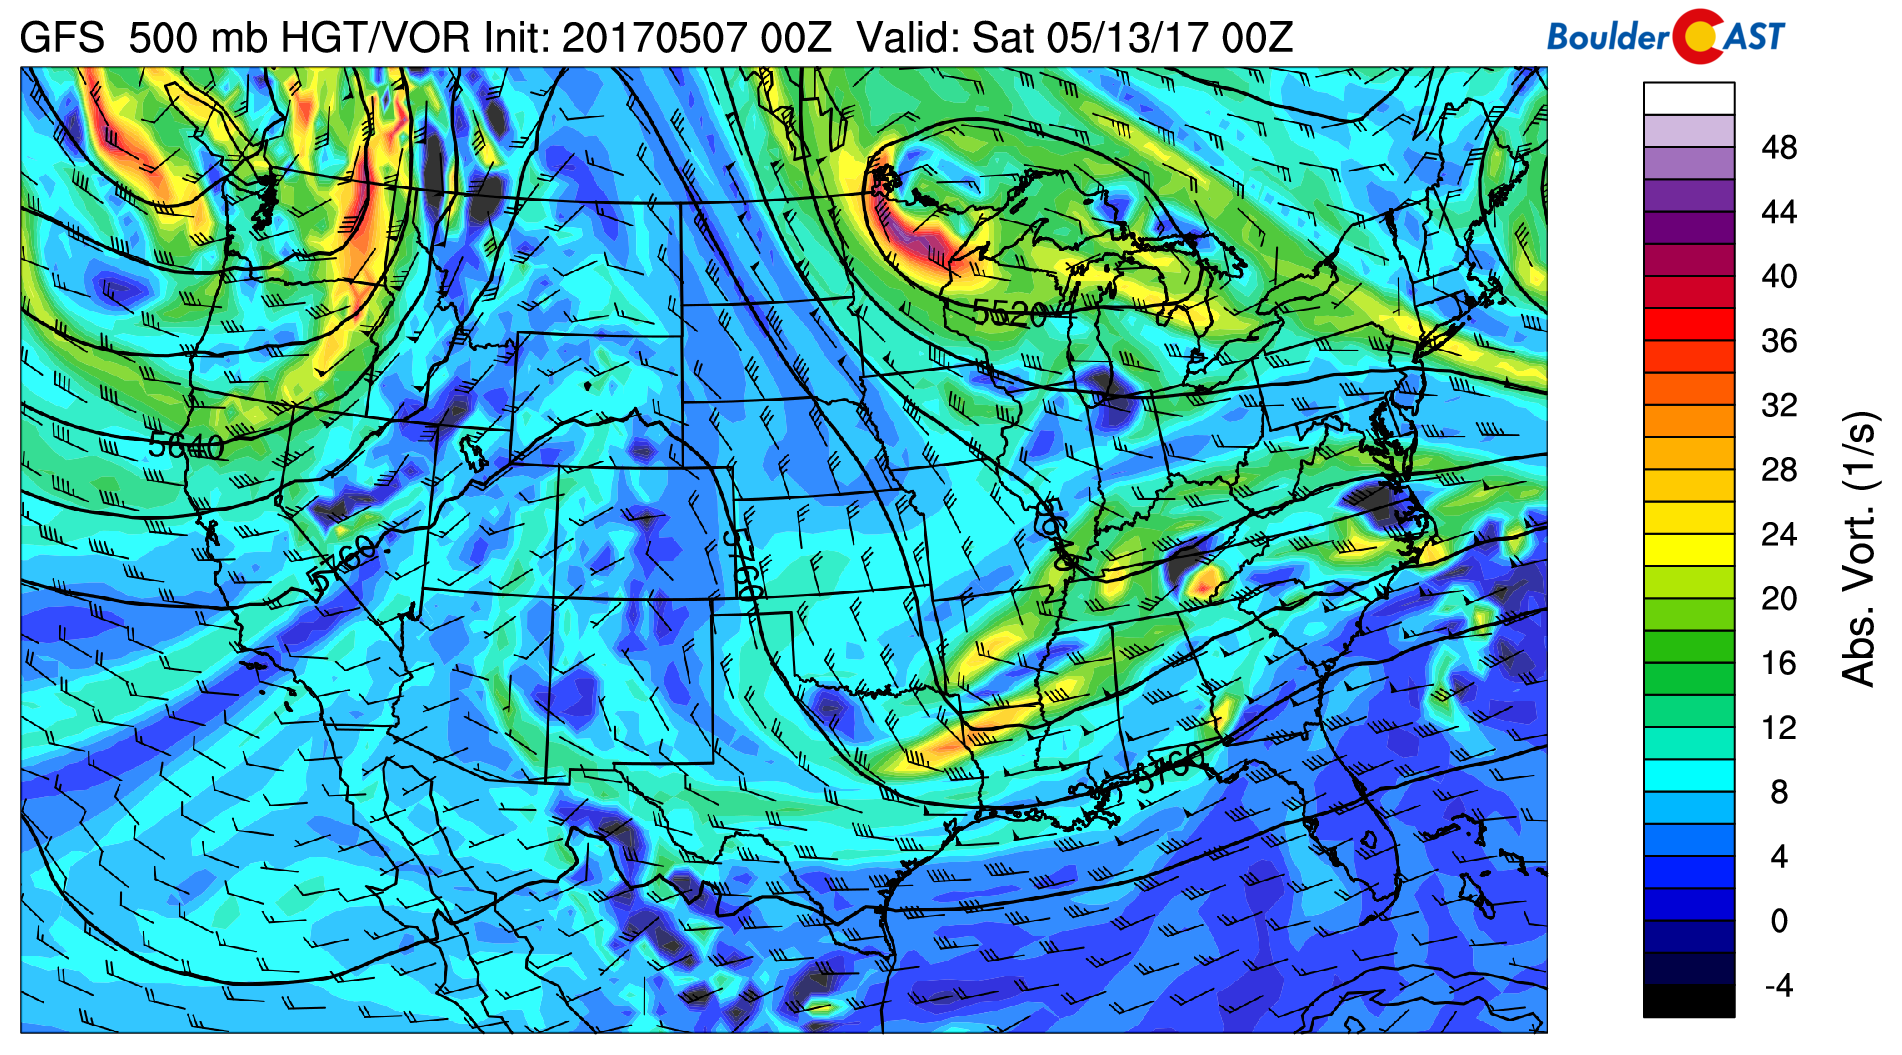 GFS 500 mb absolute vorticity for Friday